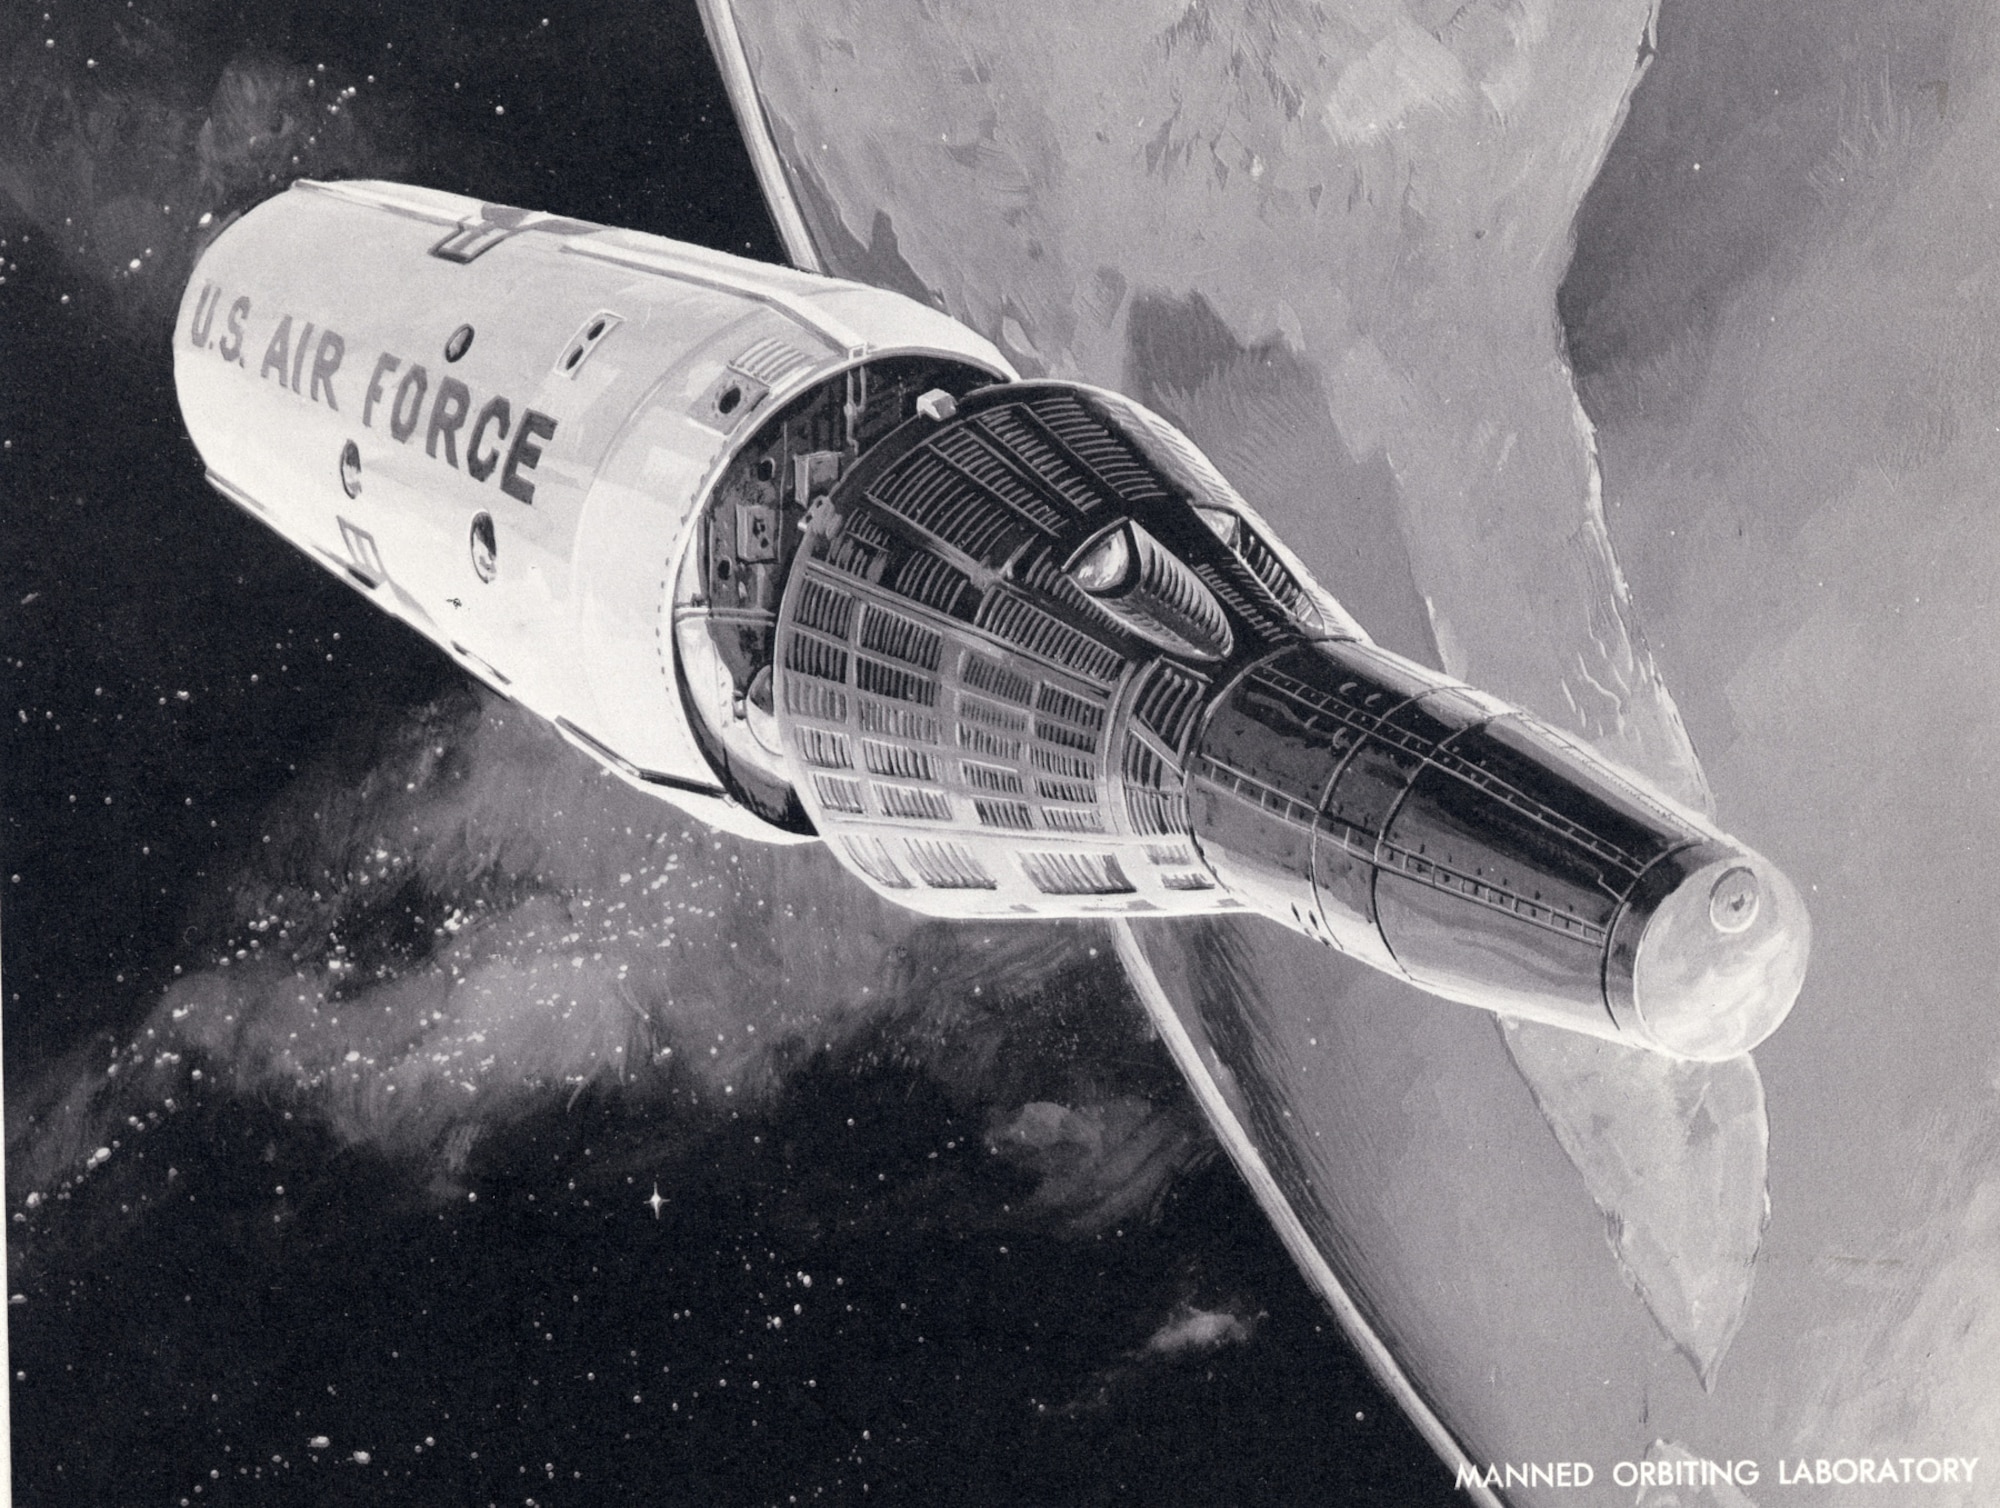 Manned Orbiting Laboratory (MOL), an evolution of the earlier "Blue Gemini" program, which was conceived to be an all-Air Force parallel of NASA's Gemini efforts. (U.S. Air Force photo)